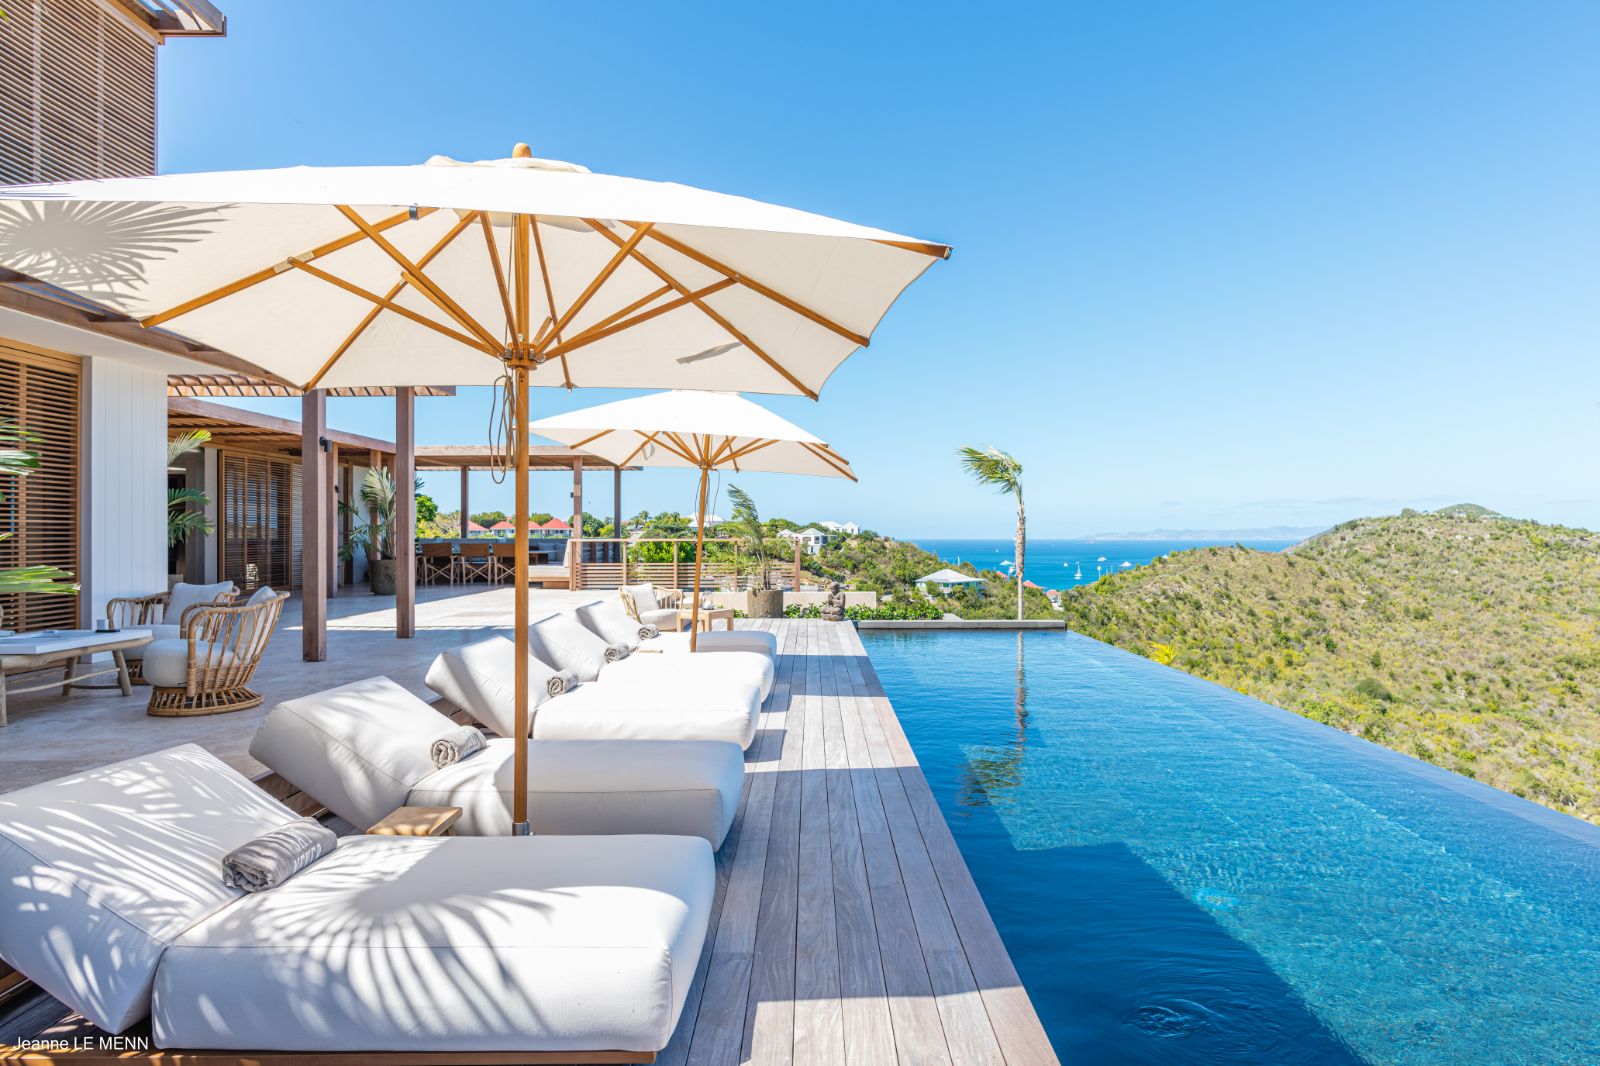 Side view of pool and sun terrace at Villa La Roche in St Barths